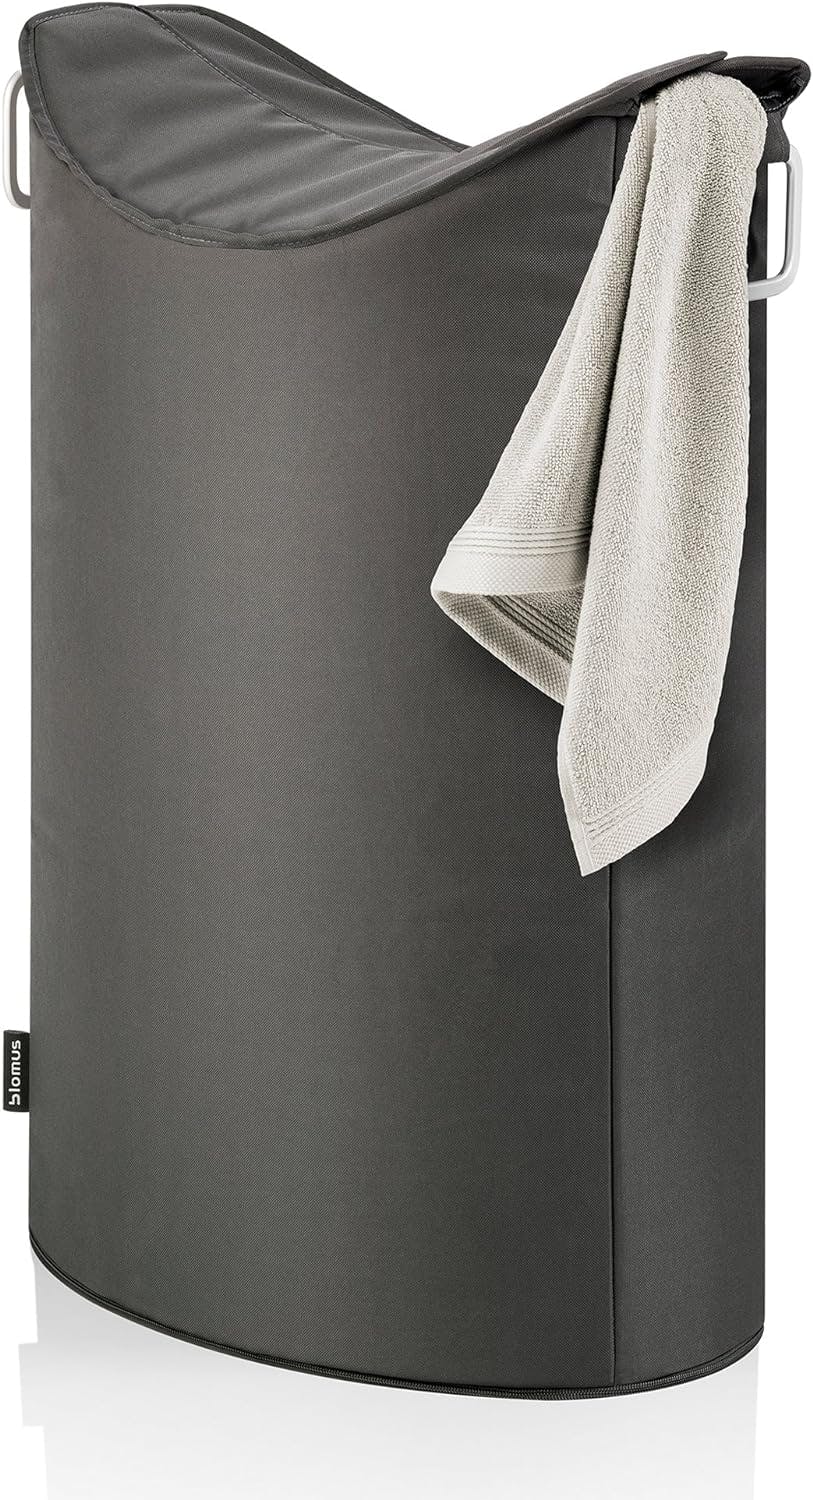 Frisco Anthrocite Collapsible Laundry Hamper with Overlapping Lid